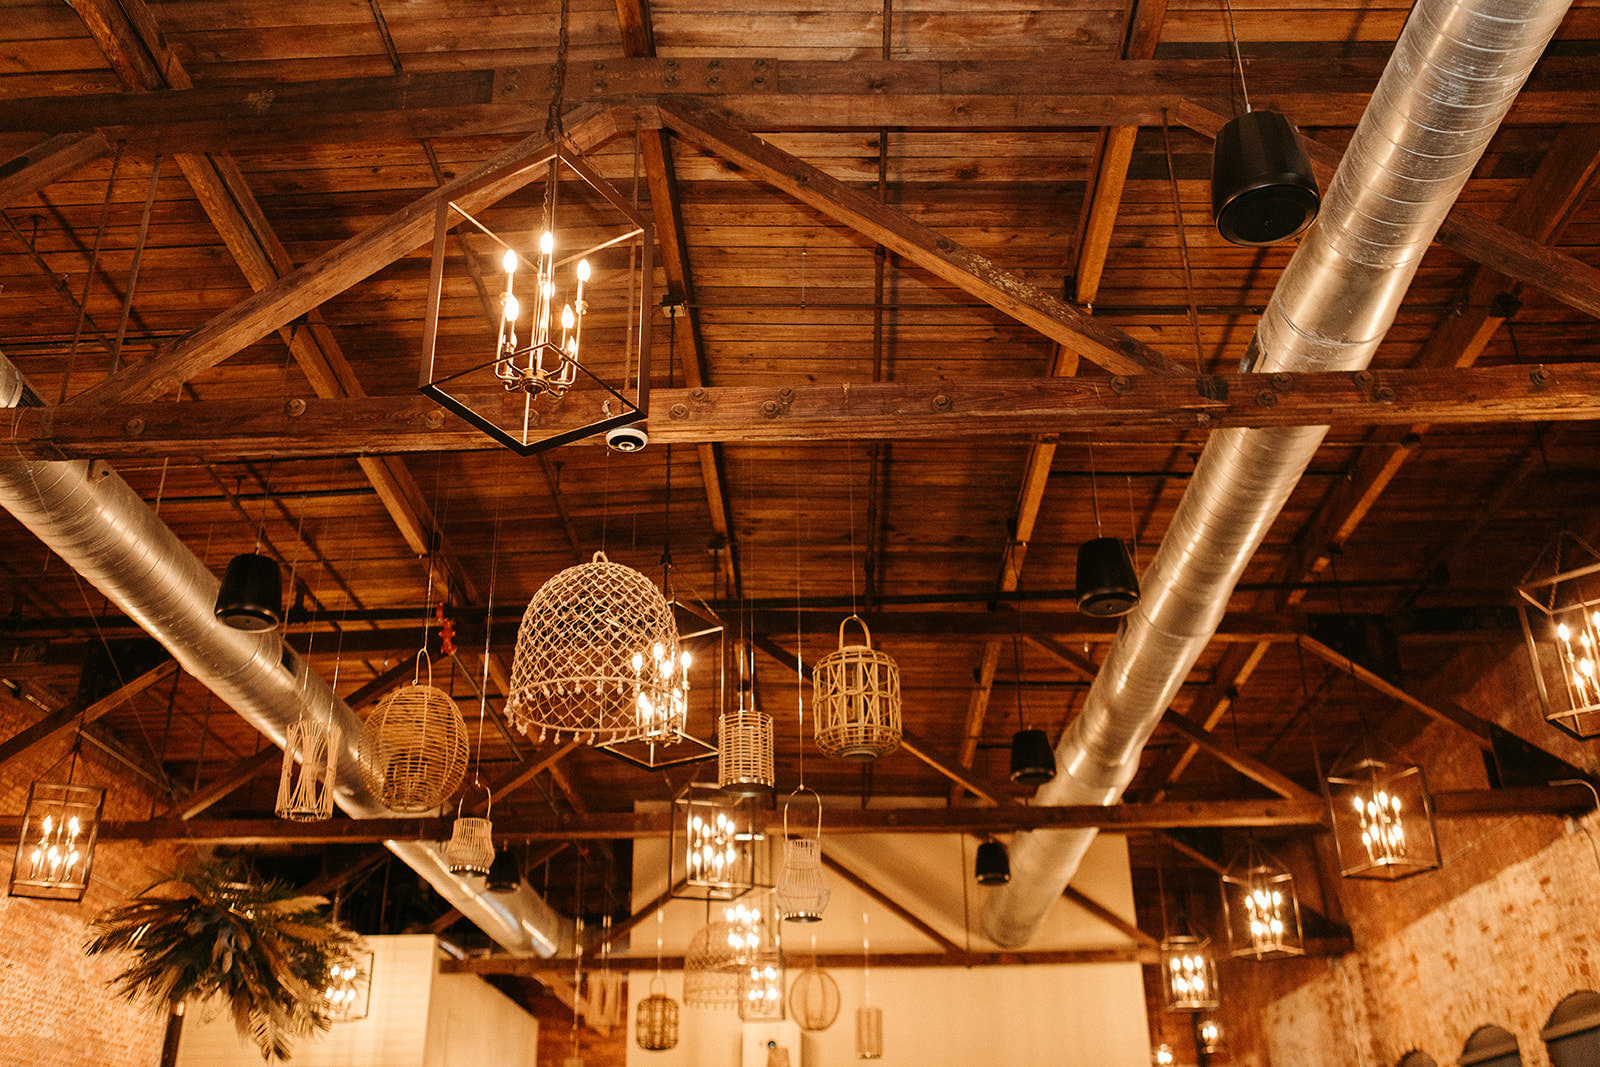 Earthy Neutral Boho Modern Chic Wedding Reception Decor, Mix and Match Wooden, Wicker and Rattan Chandeliers | Tampa Bay Wedding Planner Wilder Mind Events